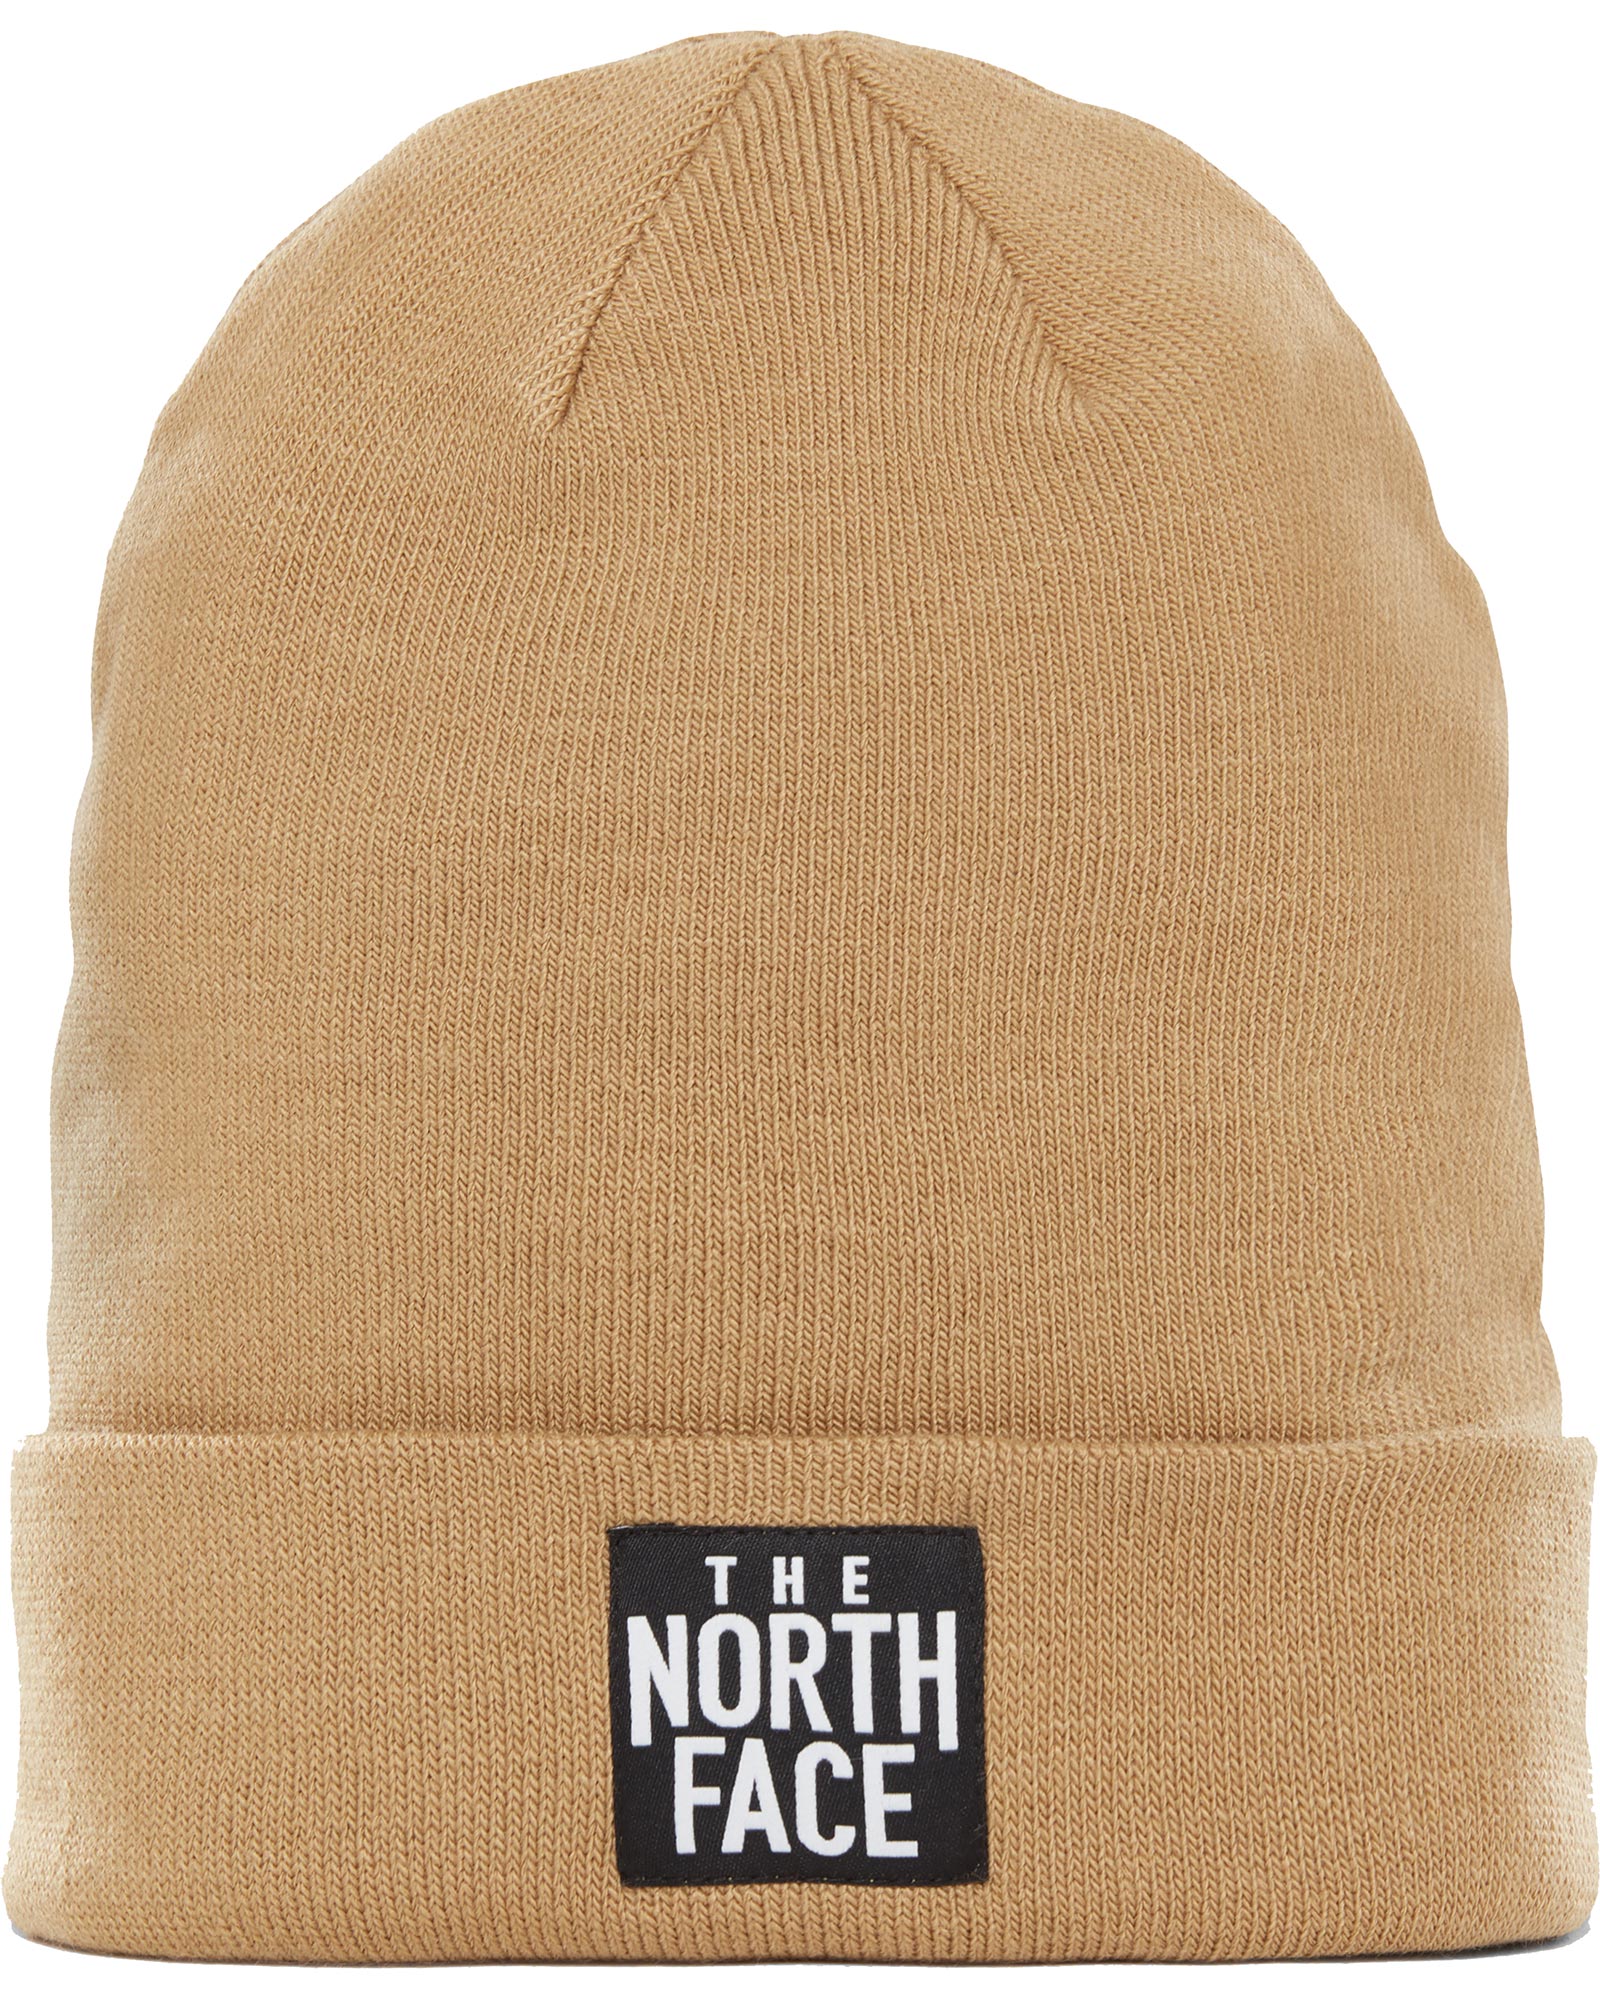 The North Face Dock Worker Beanie - Kelp Tan